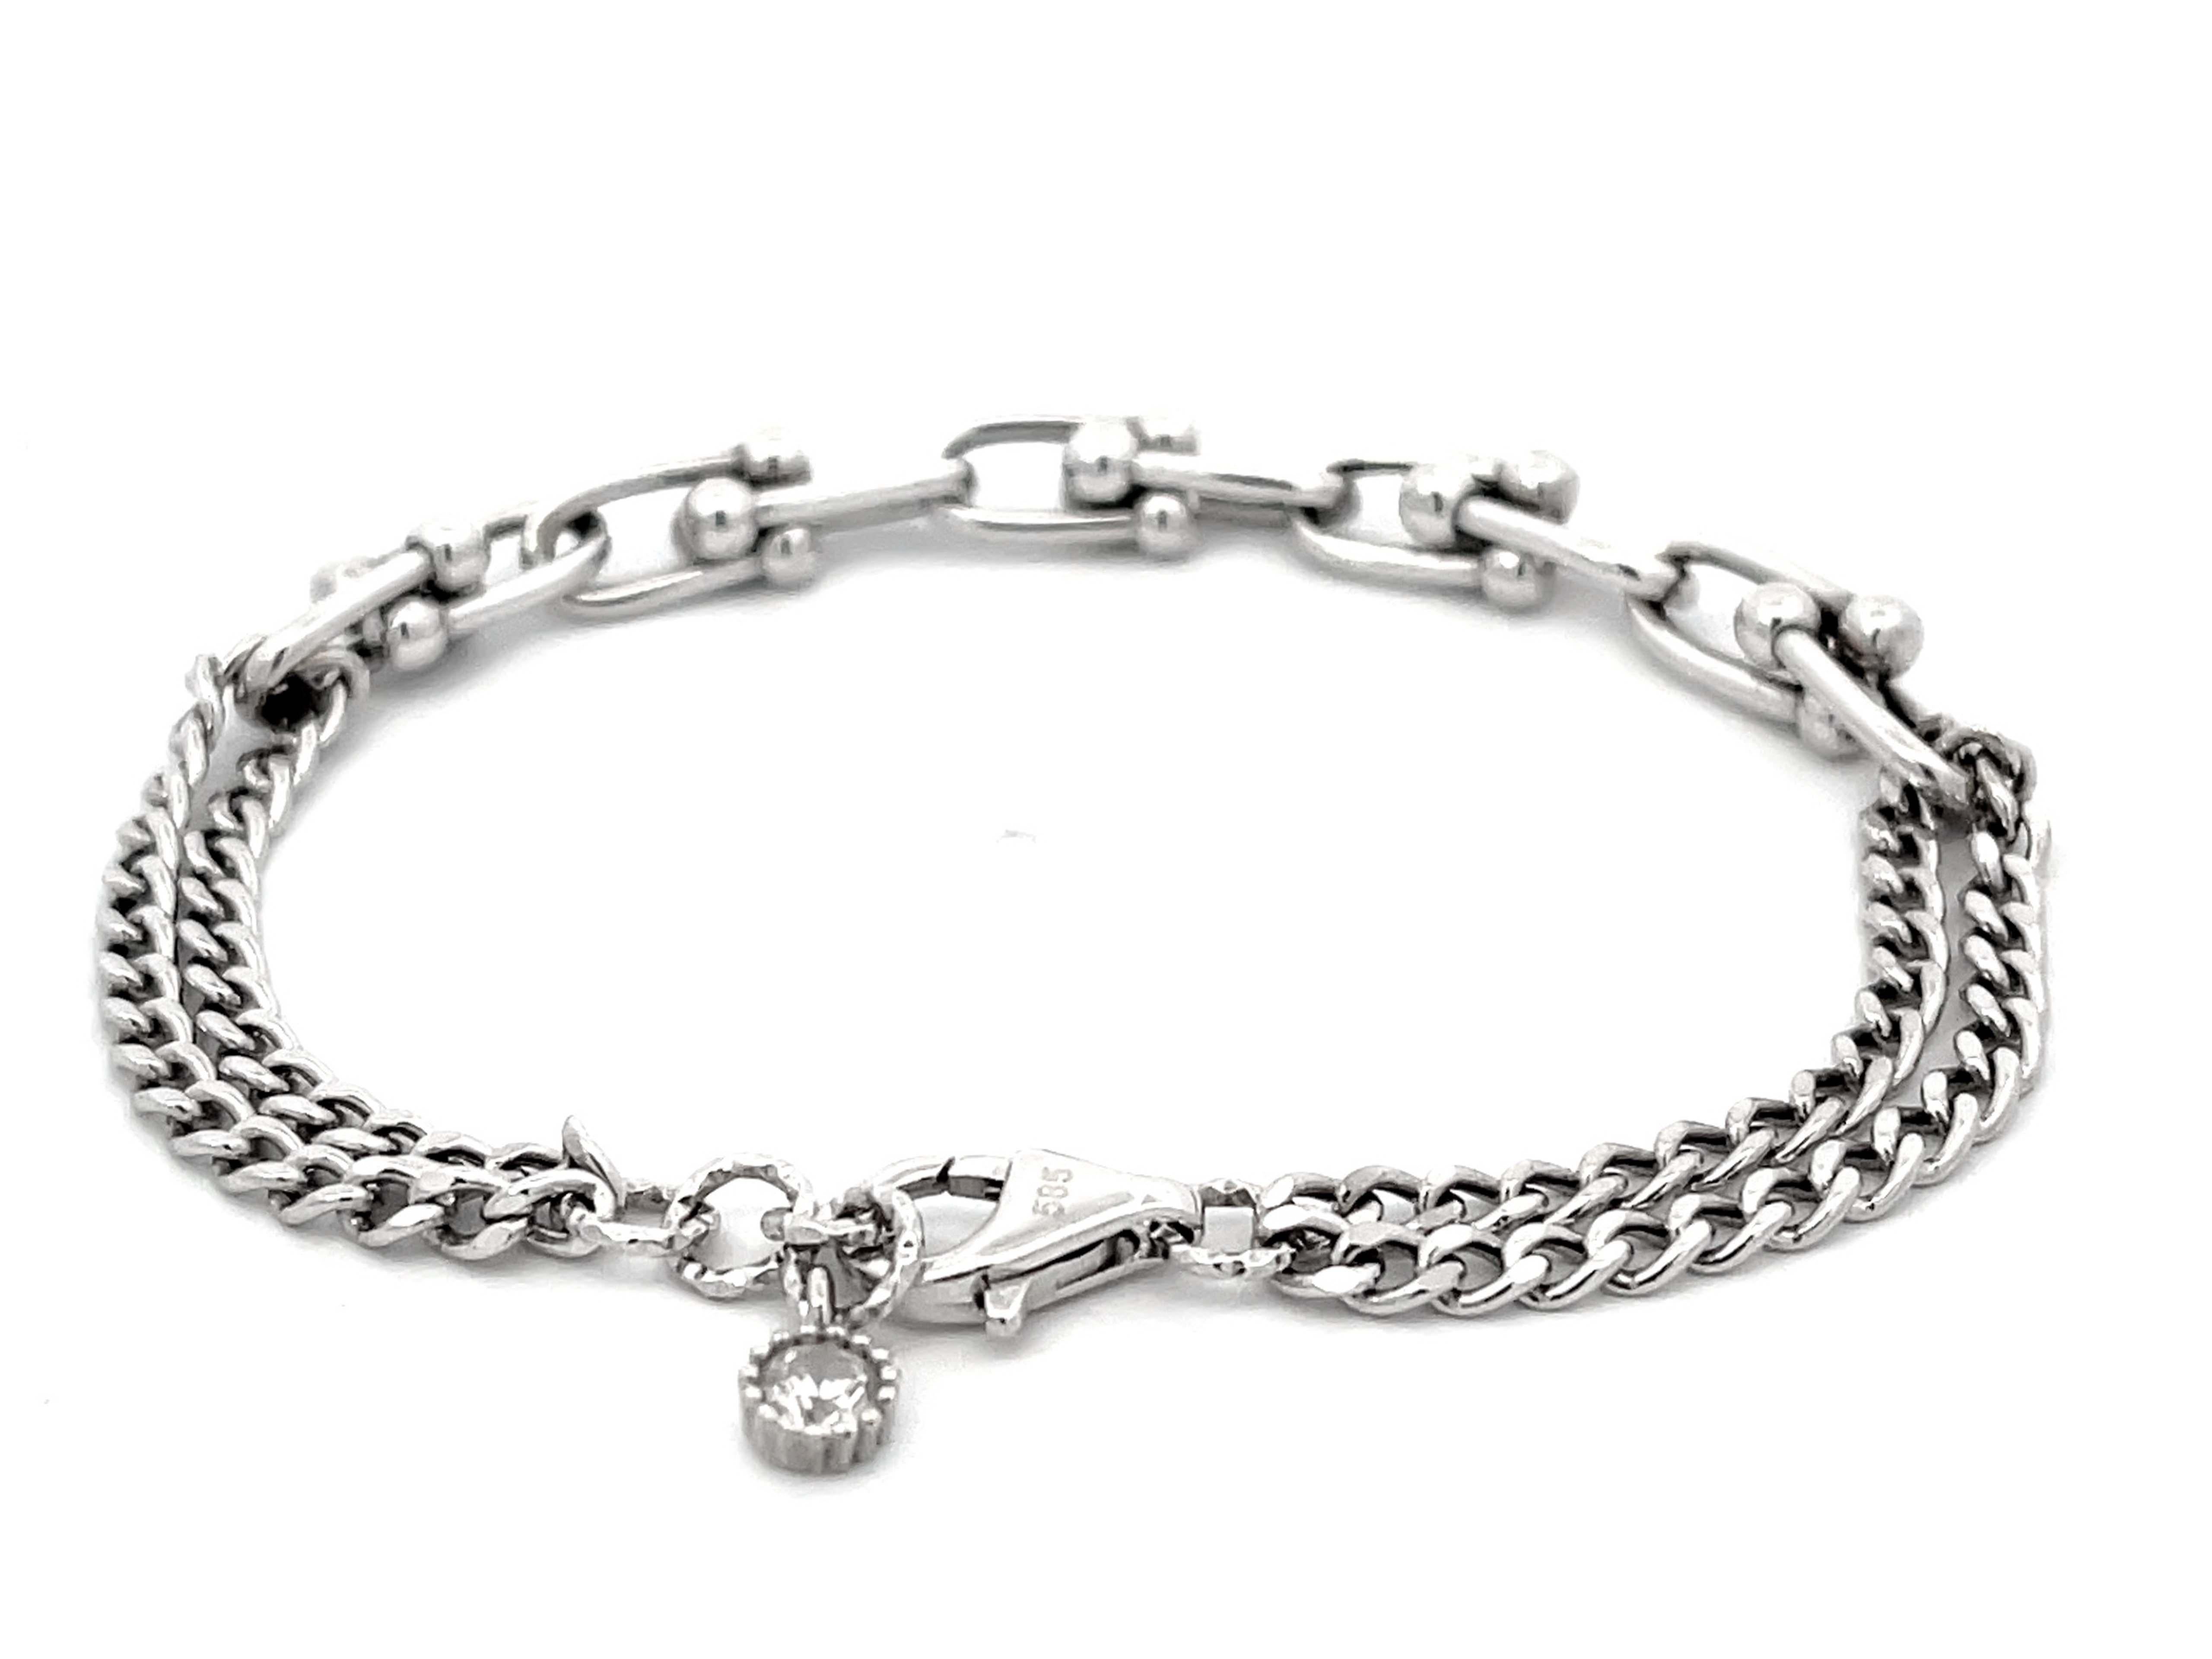 Genola Chain Link Bracelet in 14k White Gold In Excellent Condition For Sale In Honolulu, HI